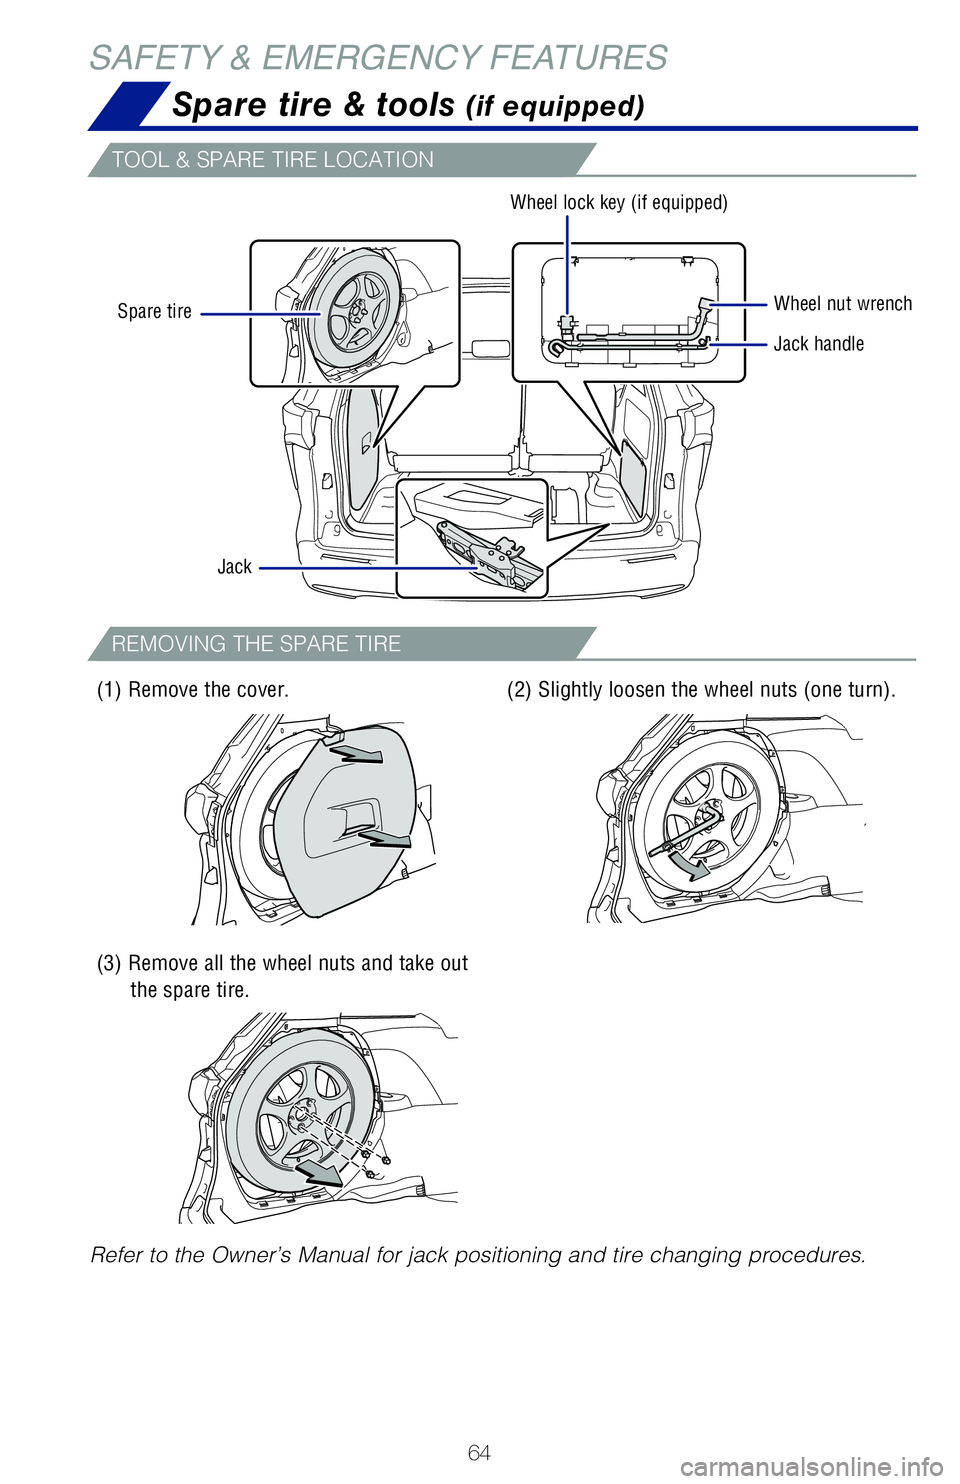 TOYOTA SIENNA HYBRID 2021  Owners Manual (in English) 64
SAFETY & EMERGENCY FEATURESSpare tire & tools  
(if equipped)
Refer to the Owner’s Manual for jack positioning and tire changing pr\
ocedures.
(1) Remove the cover.
(3) Remove all the wheel nuts 